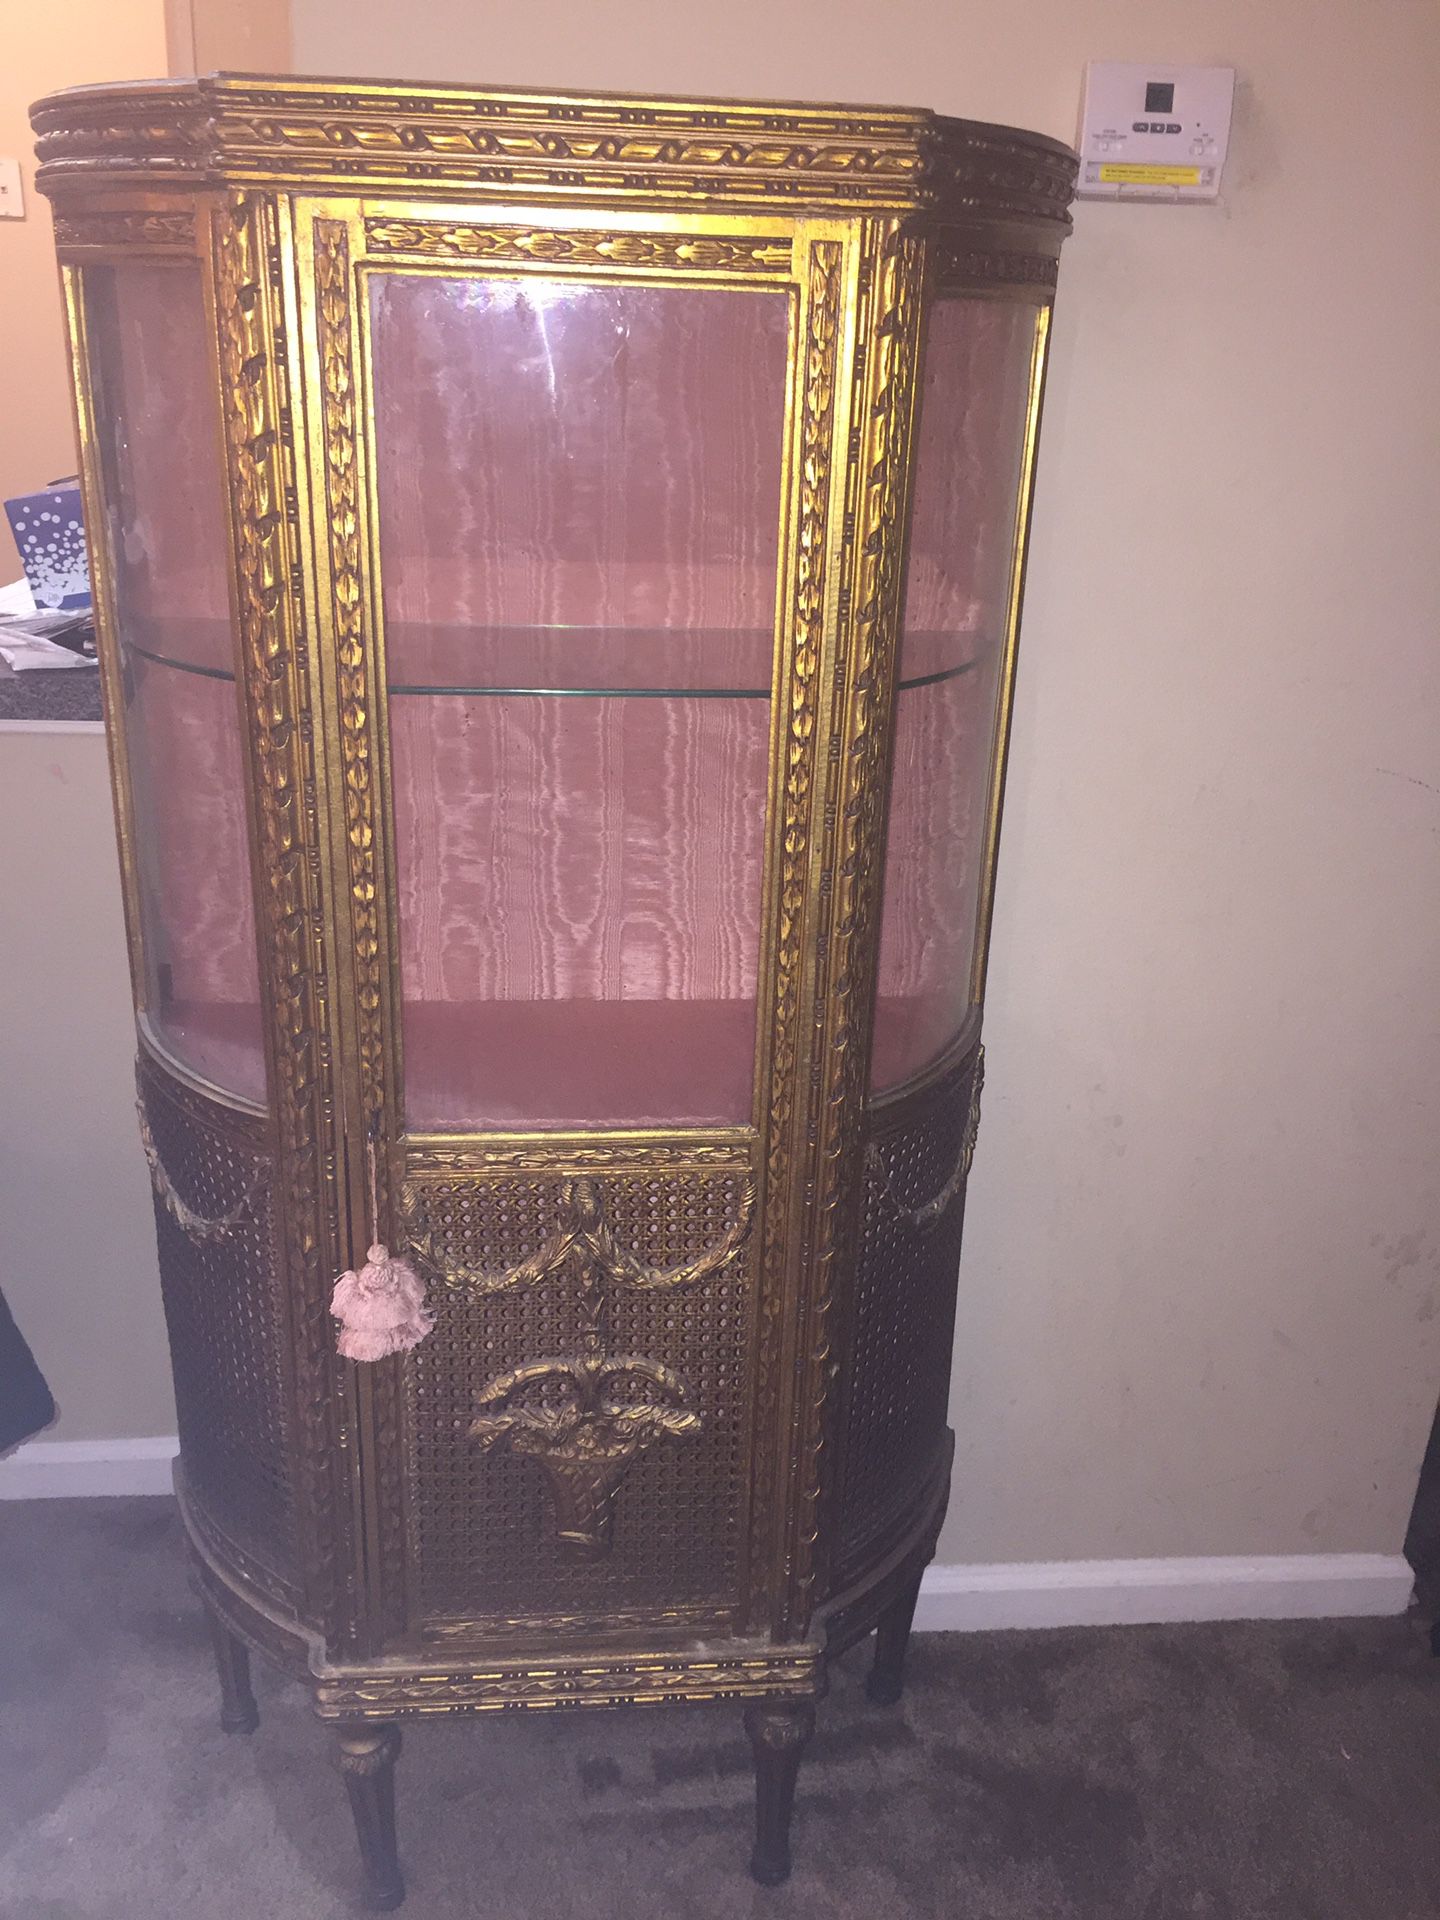 Antique furniture from 1929 in excellent condition